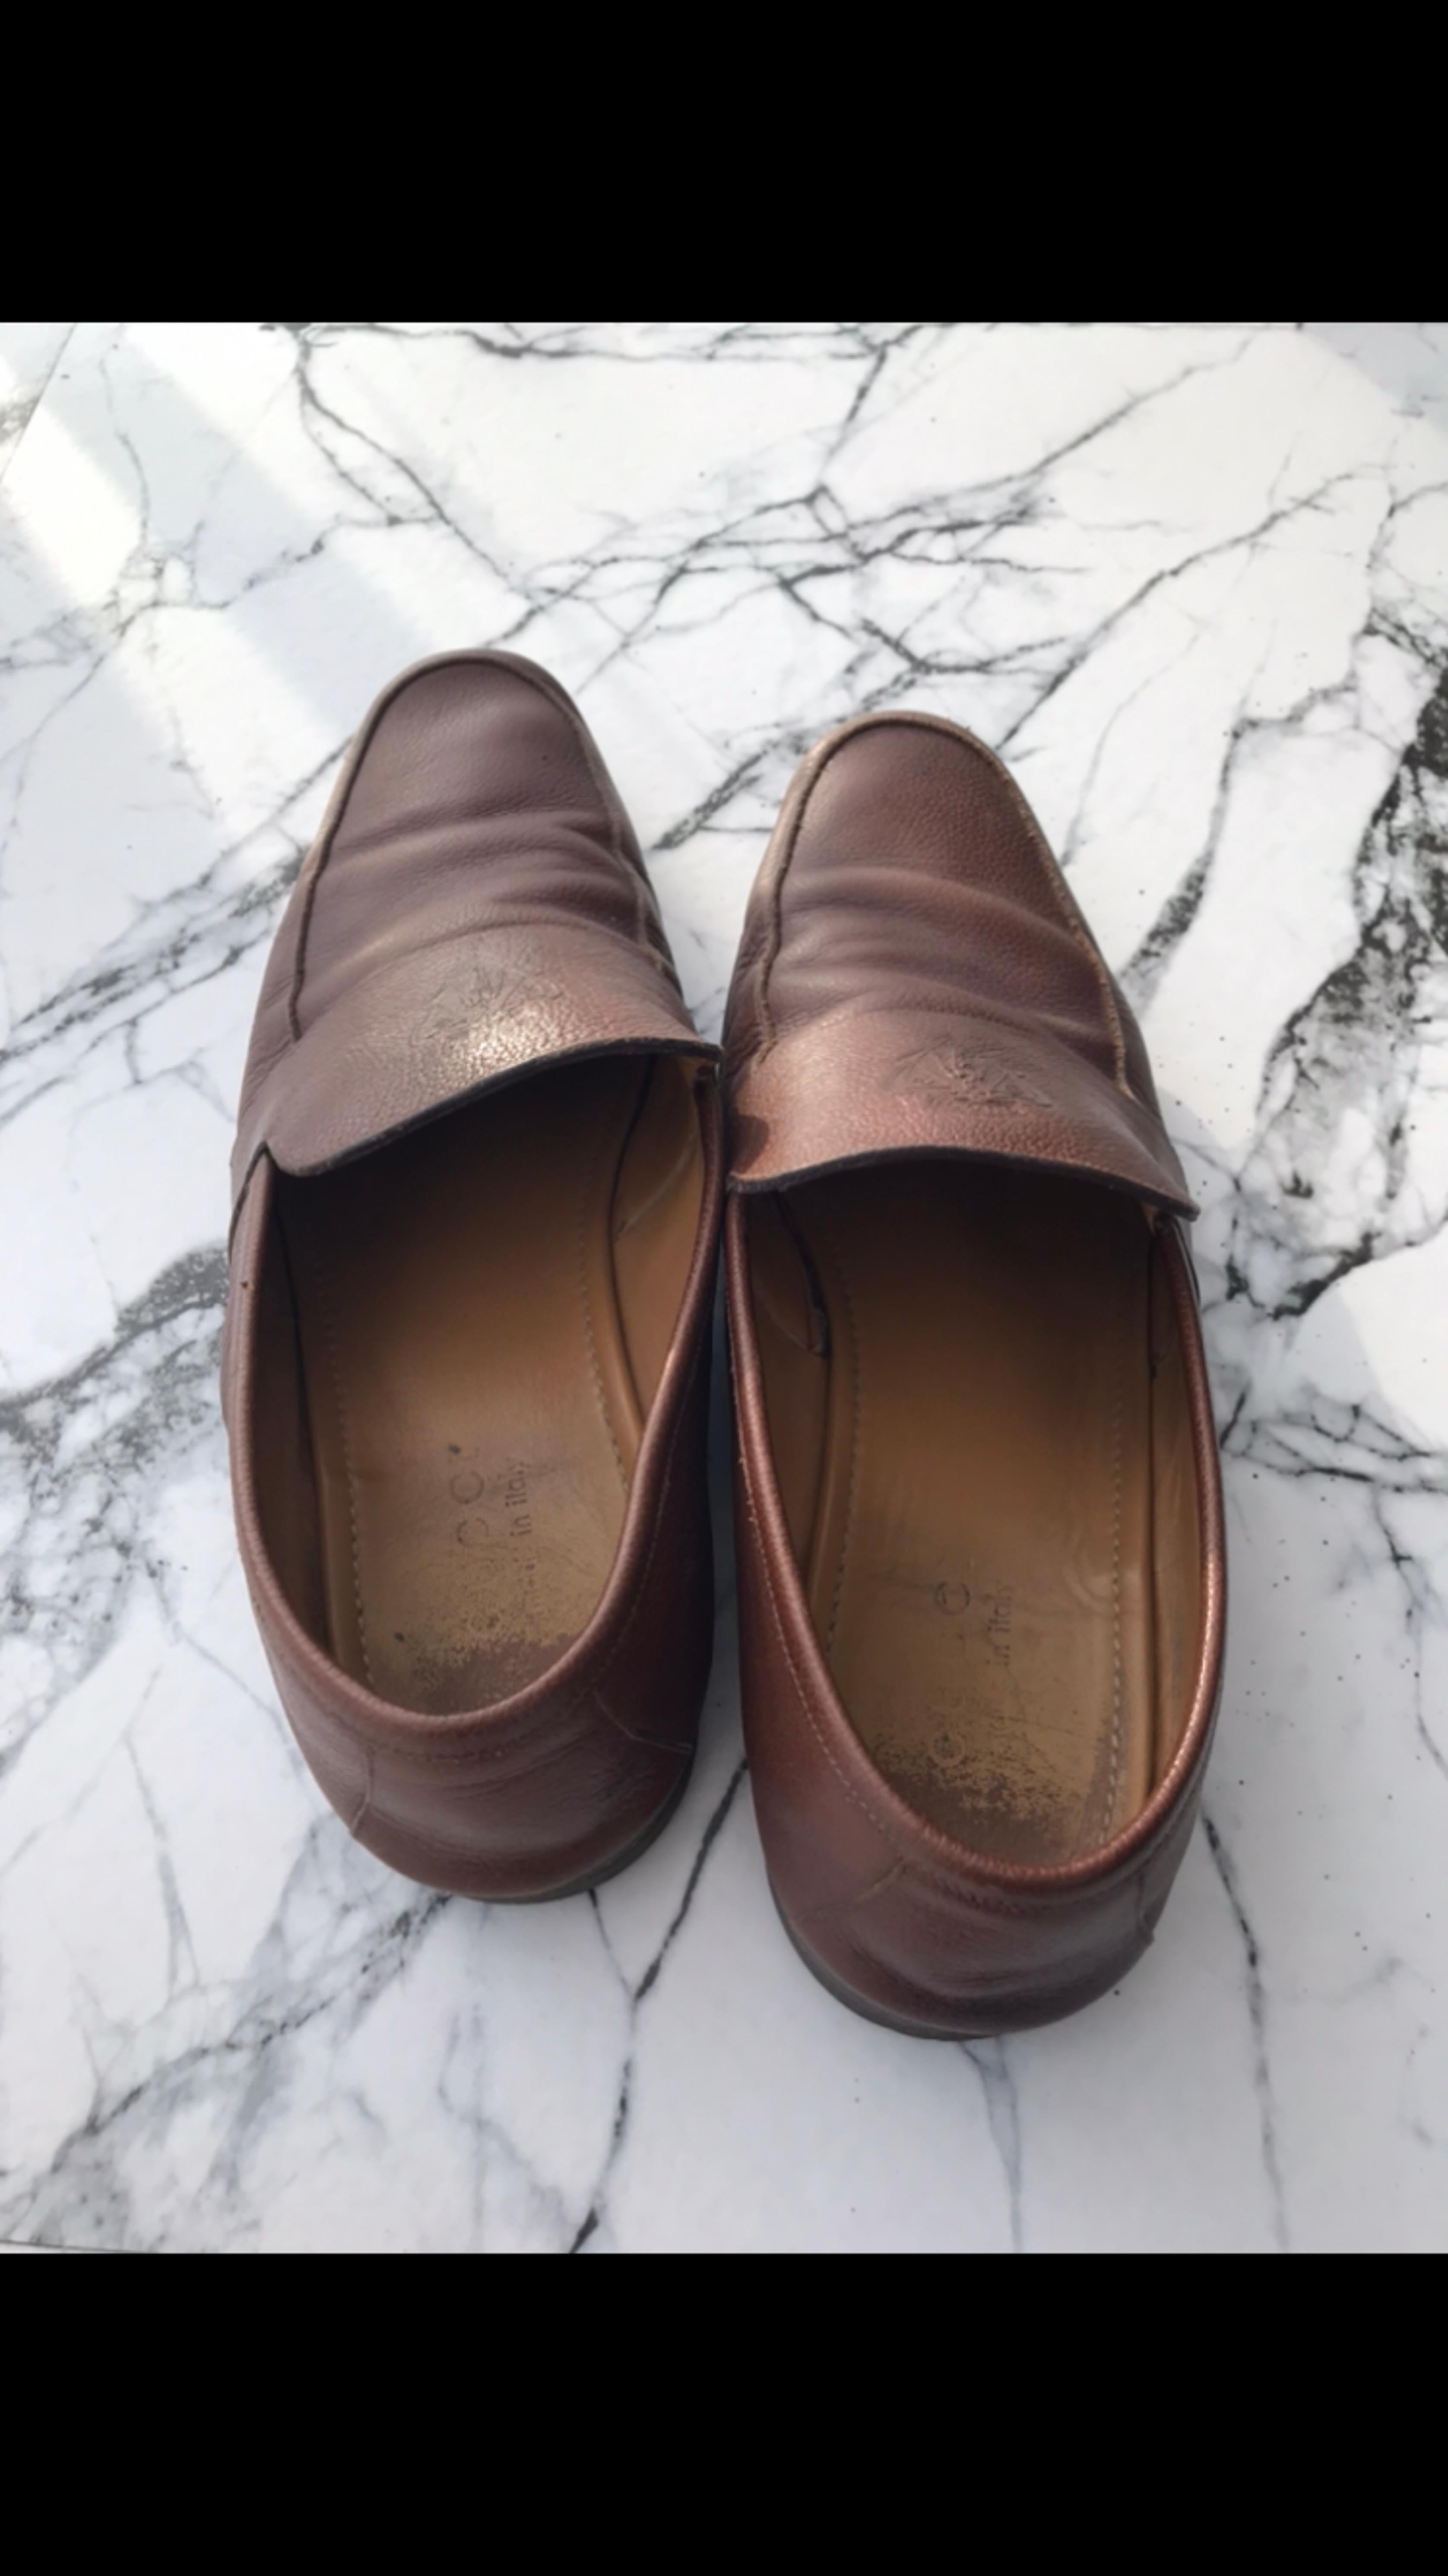 Men's classic boots made of brown leather, previously used condition in the photo, size 41 European. The size is indicated on the sole in one of the photos